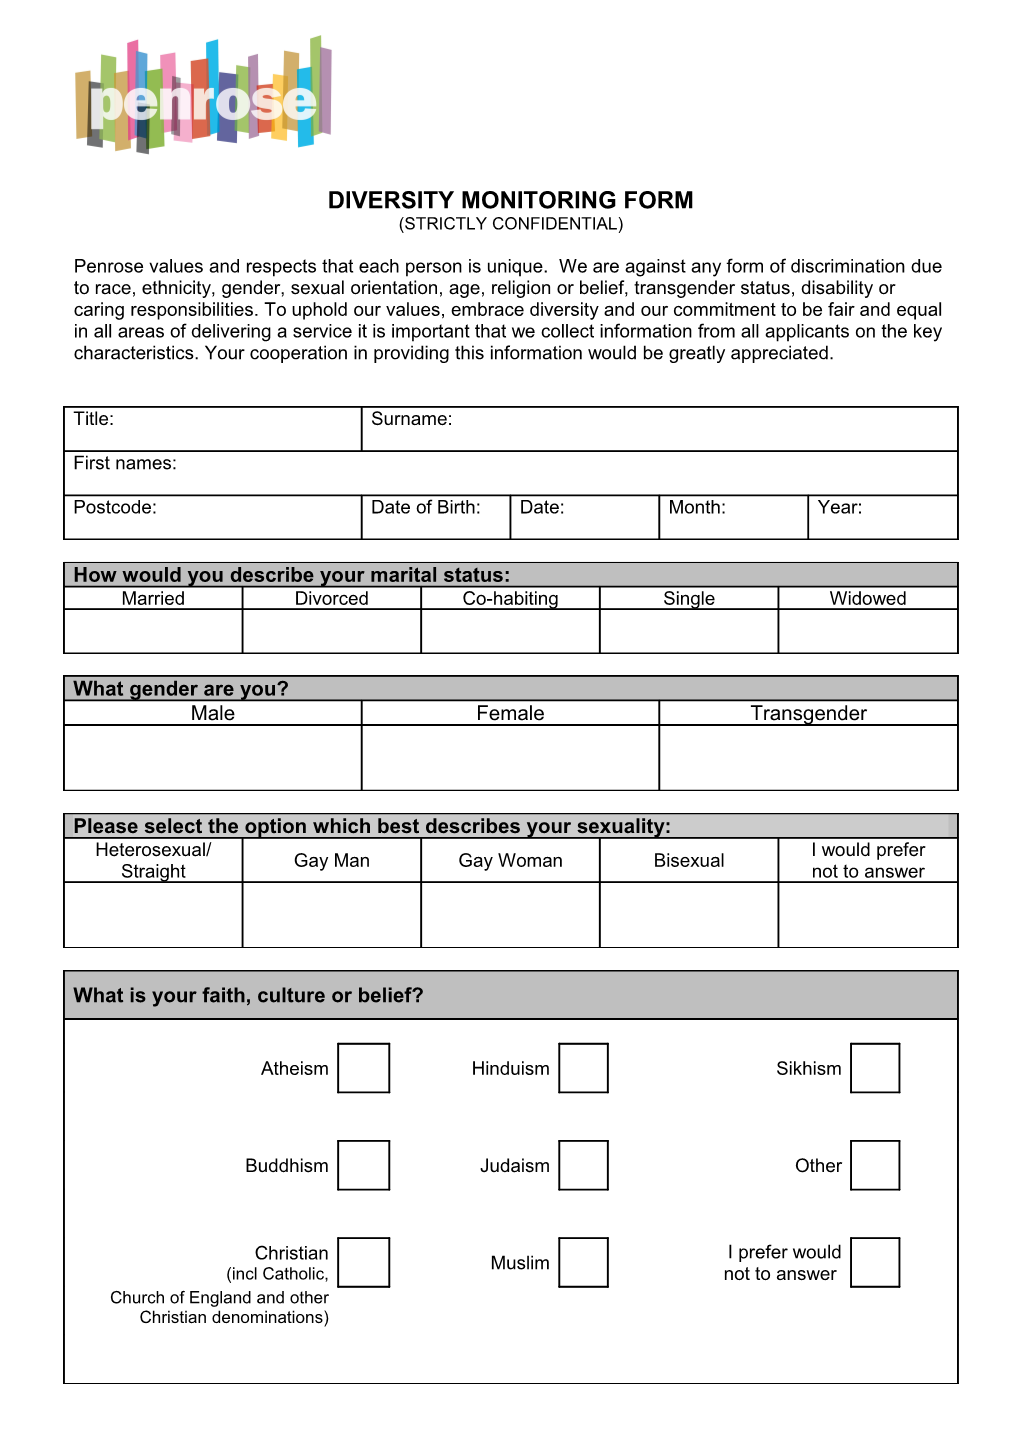 Equal Opportunities Monitoring Form s10